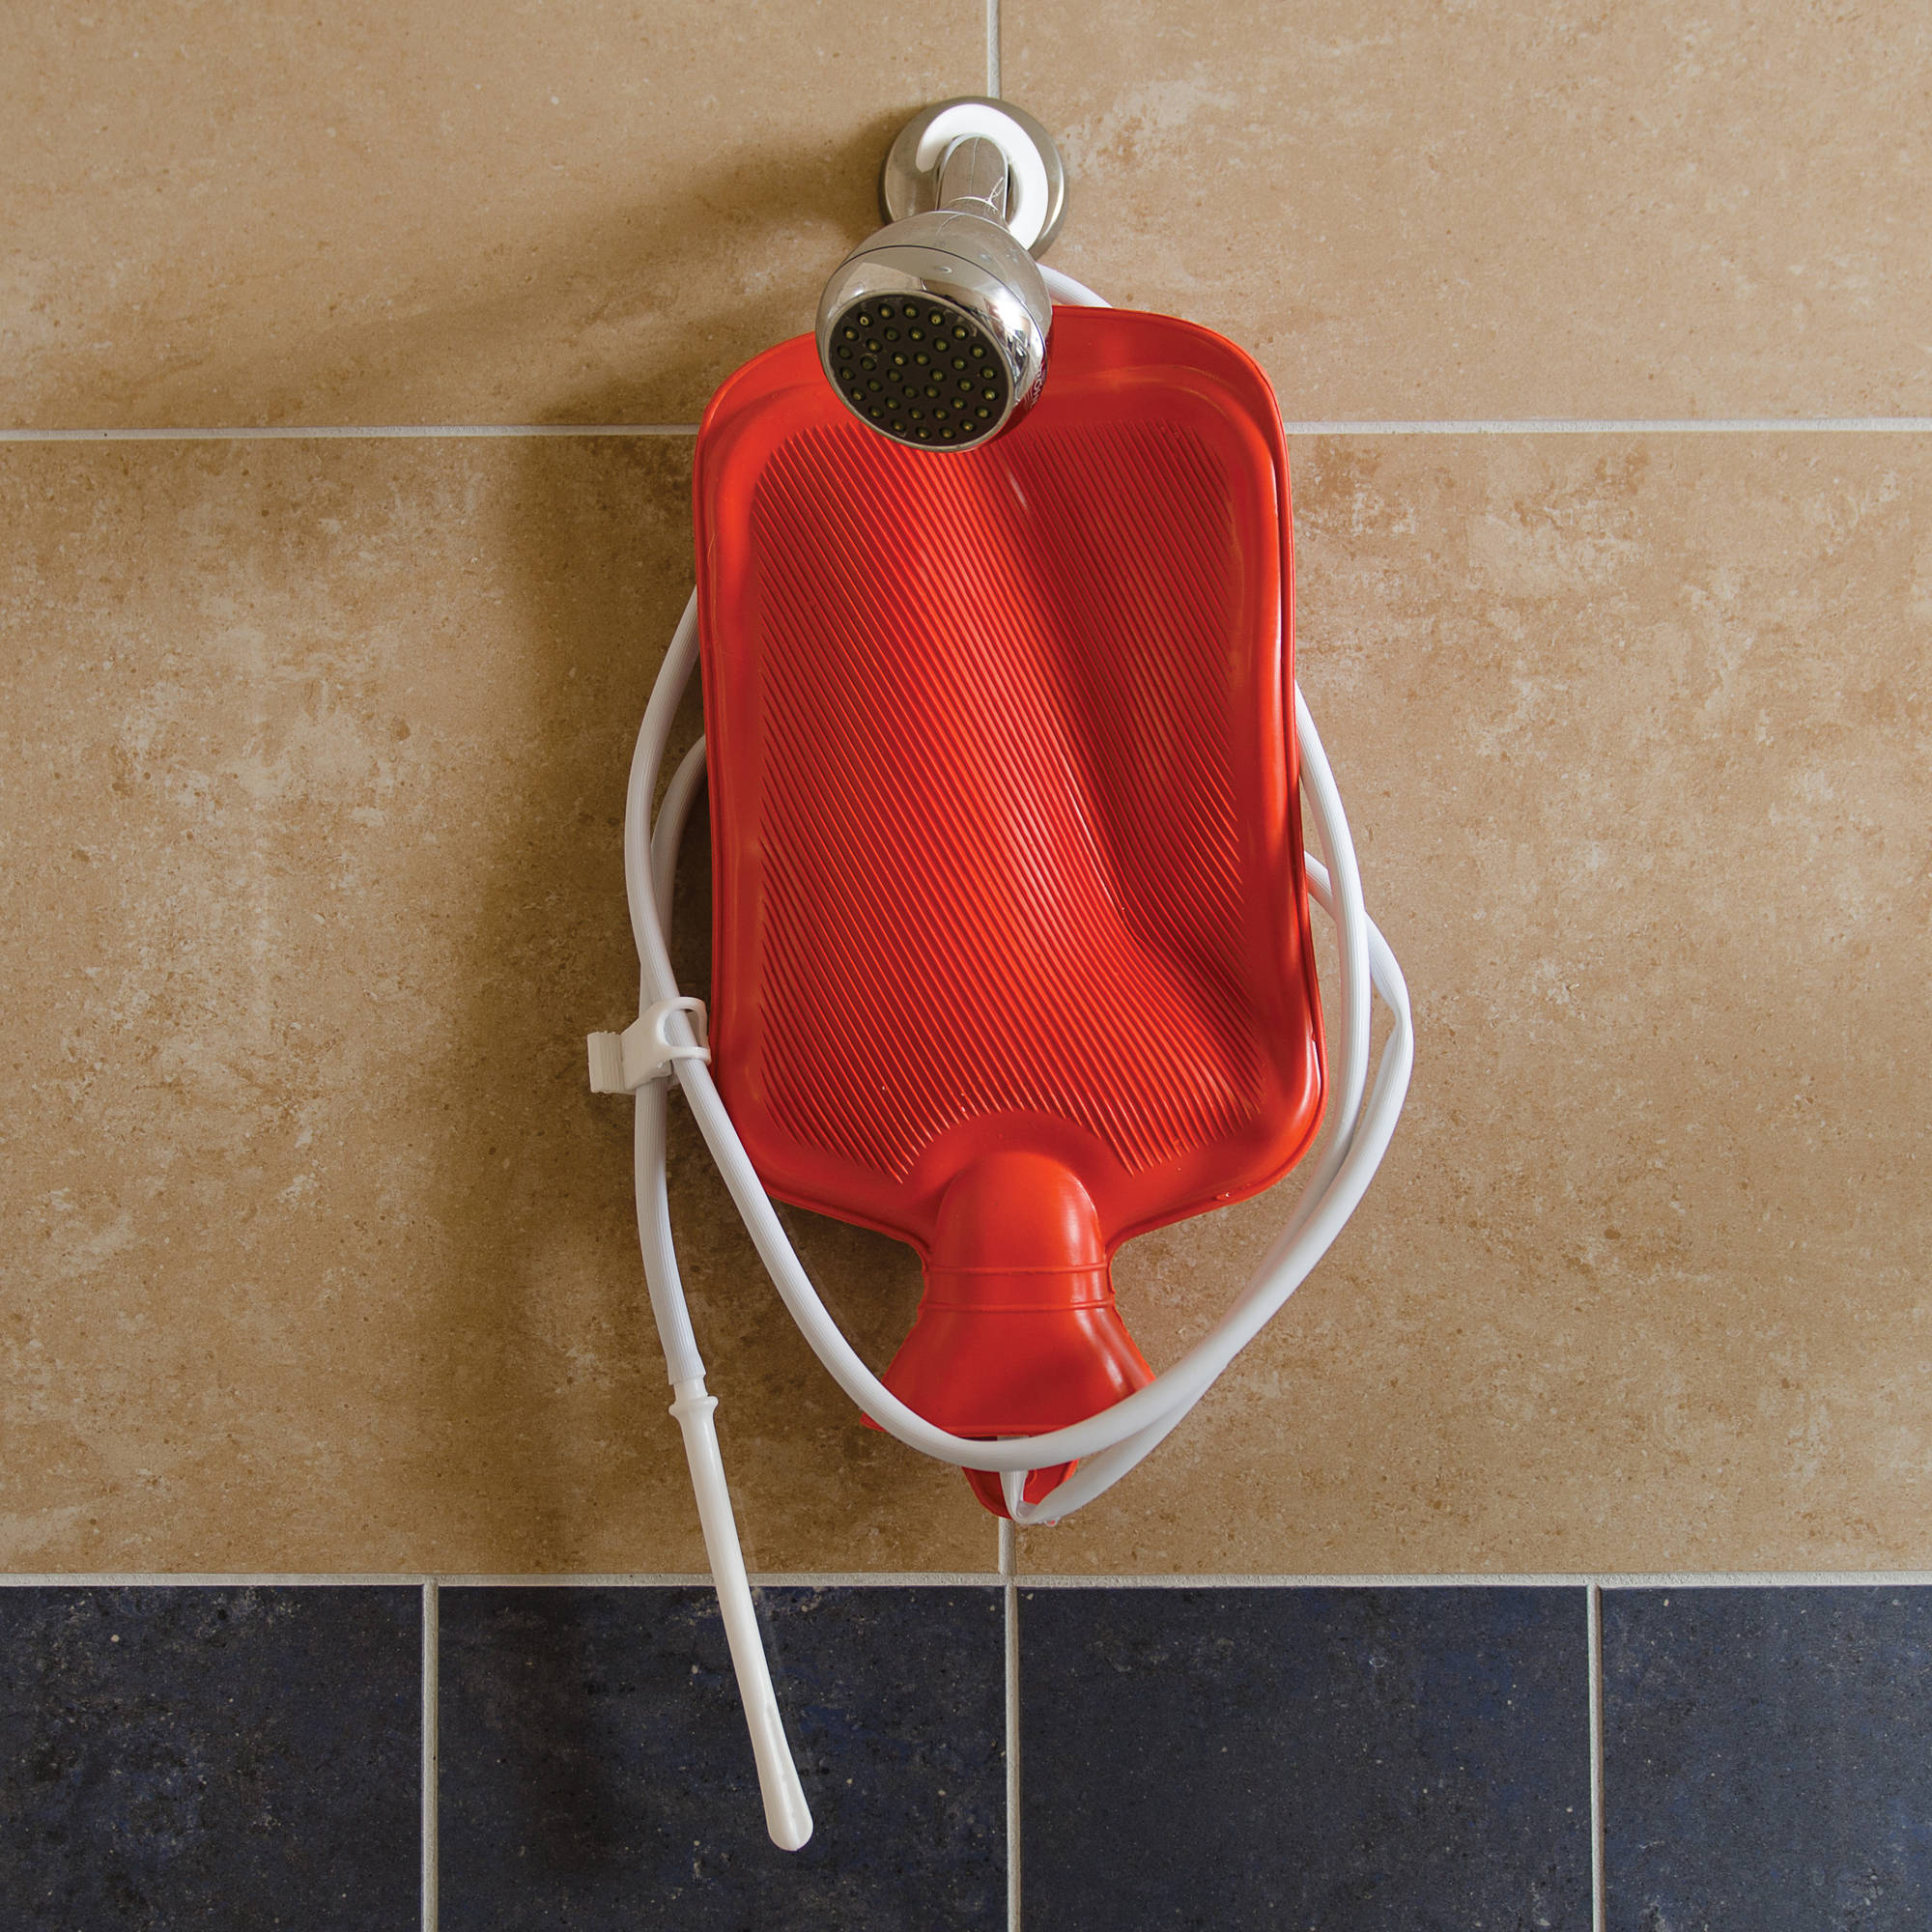 MABIS Reusable Hot Water Bottle, Enema and Douche Kit Helps to Alleviate Pain Associated with Constipation, Bloating, Aches and Pains, 2 Quart Capacity - image 4 of 7